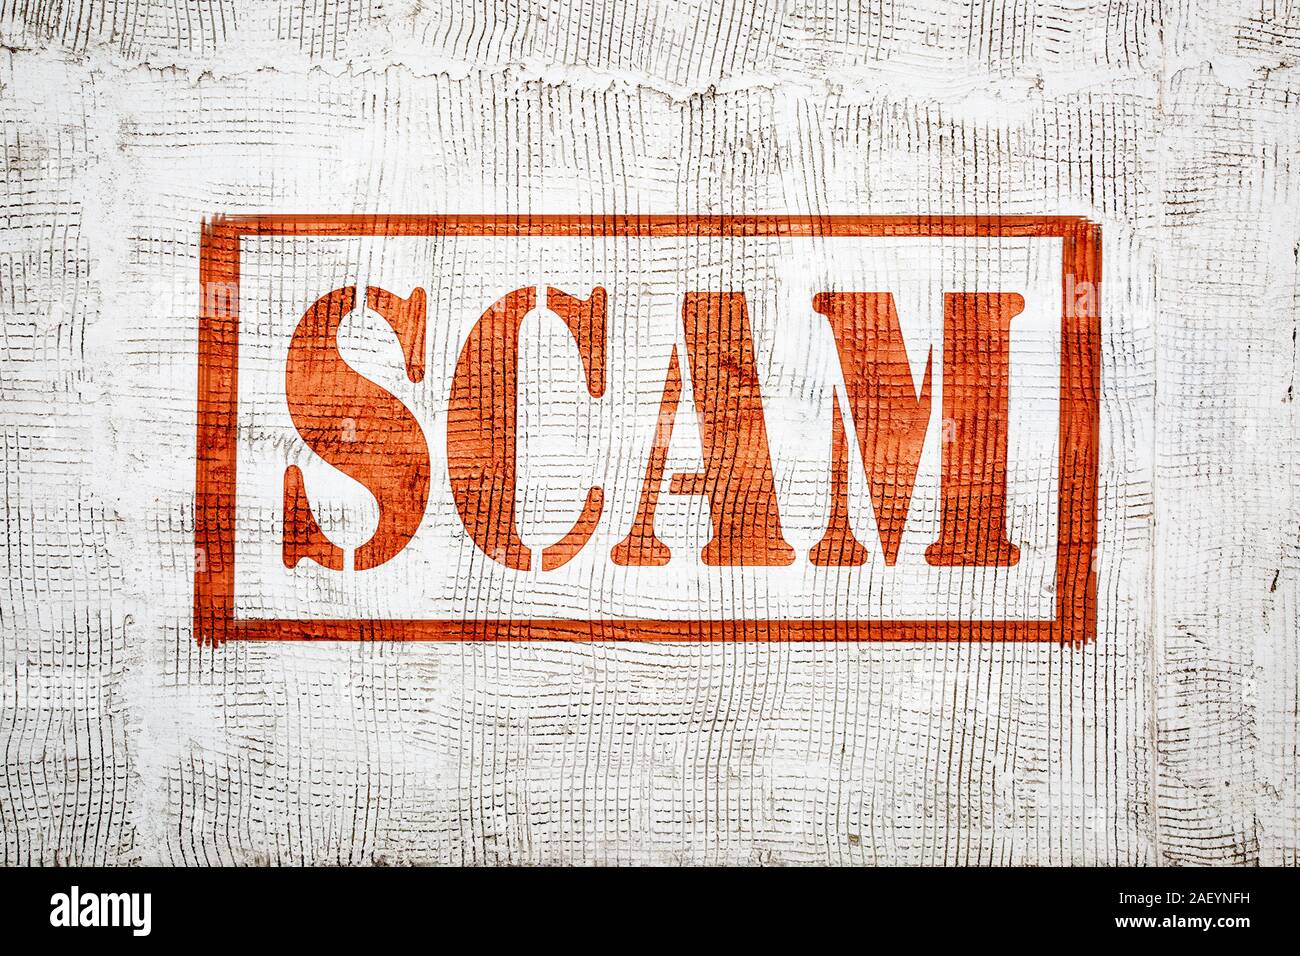 scam - red graffiti style sign on a white stucco wall, dishonest scheme or fraud concept Stock Photo